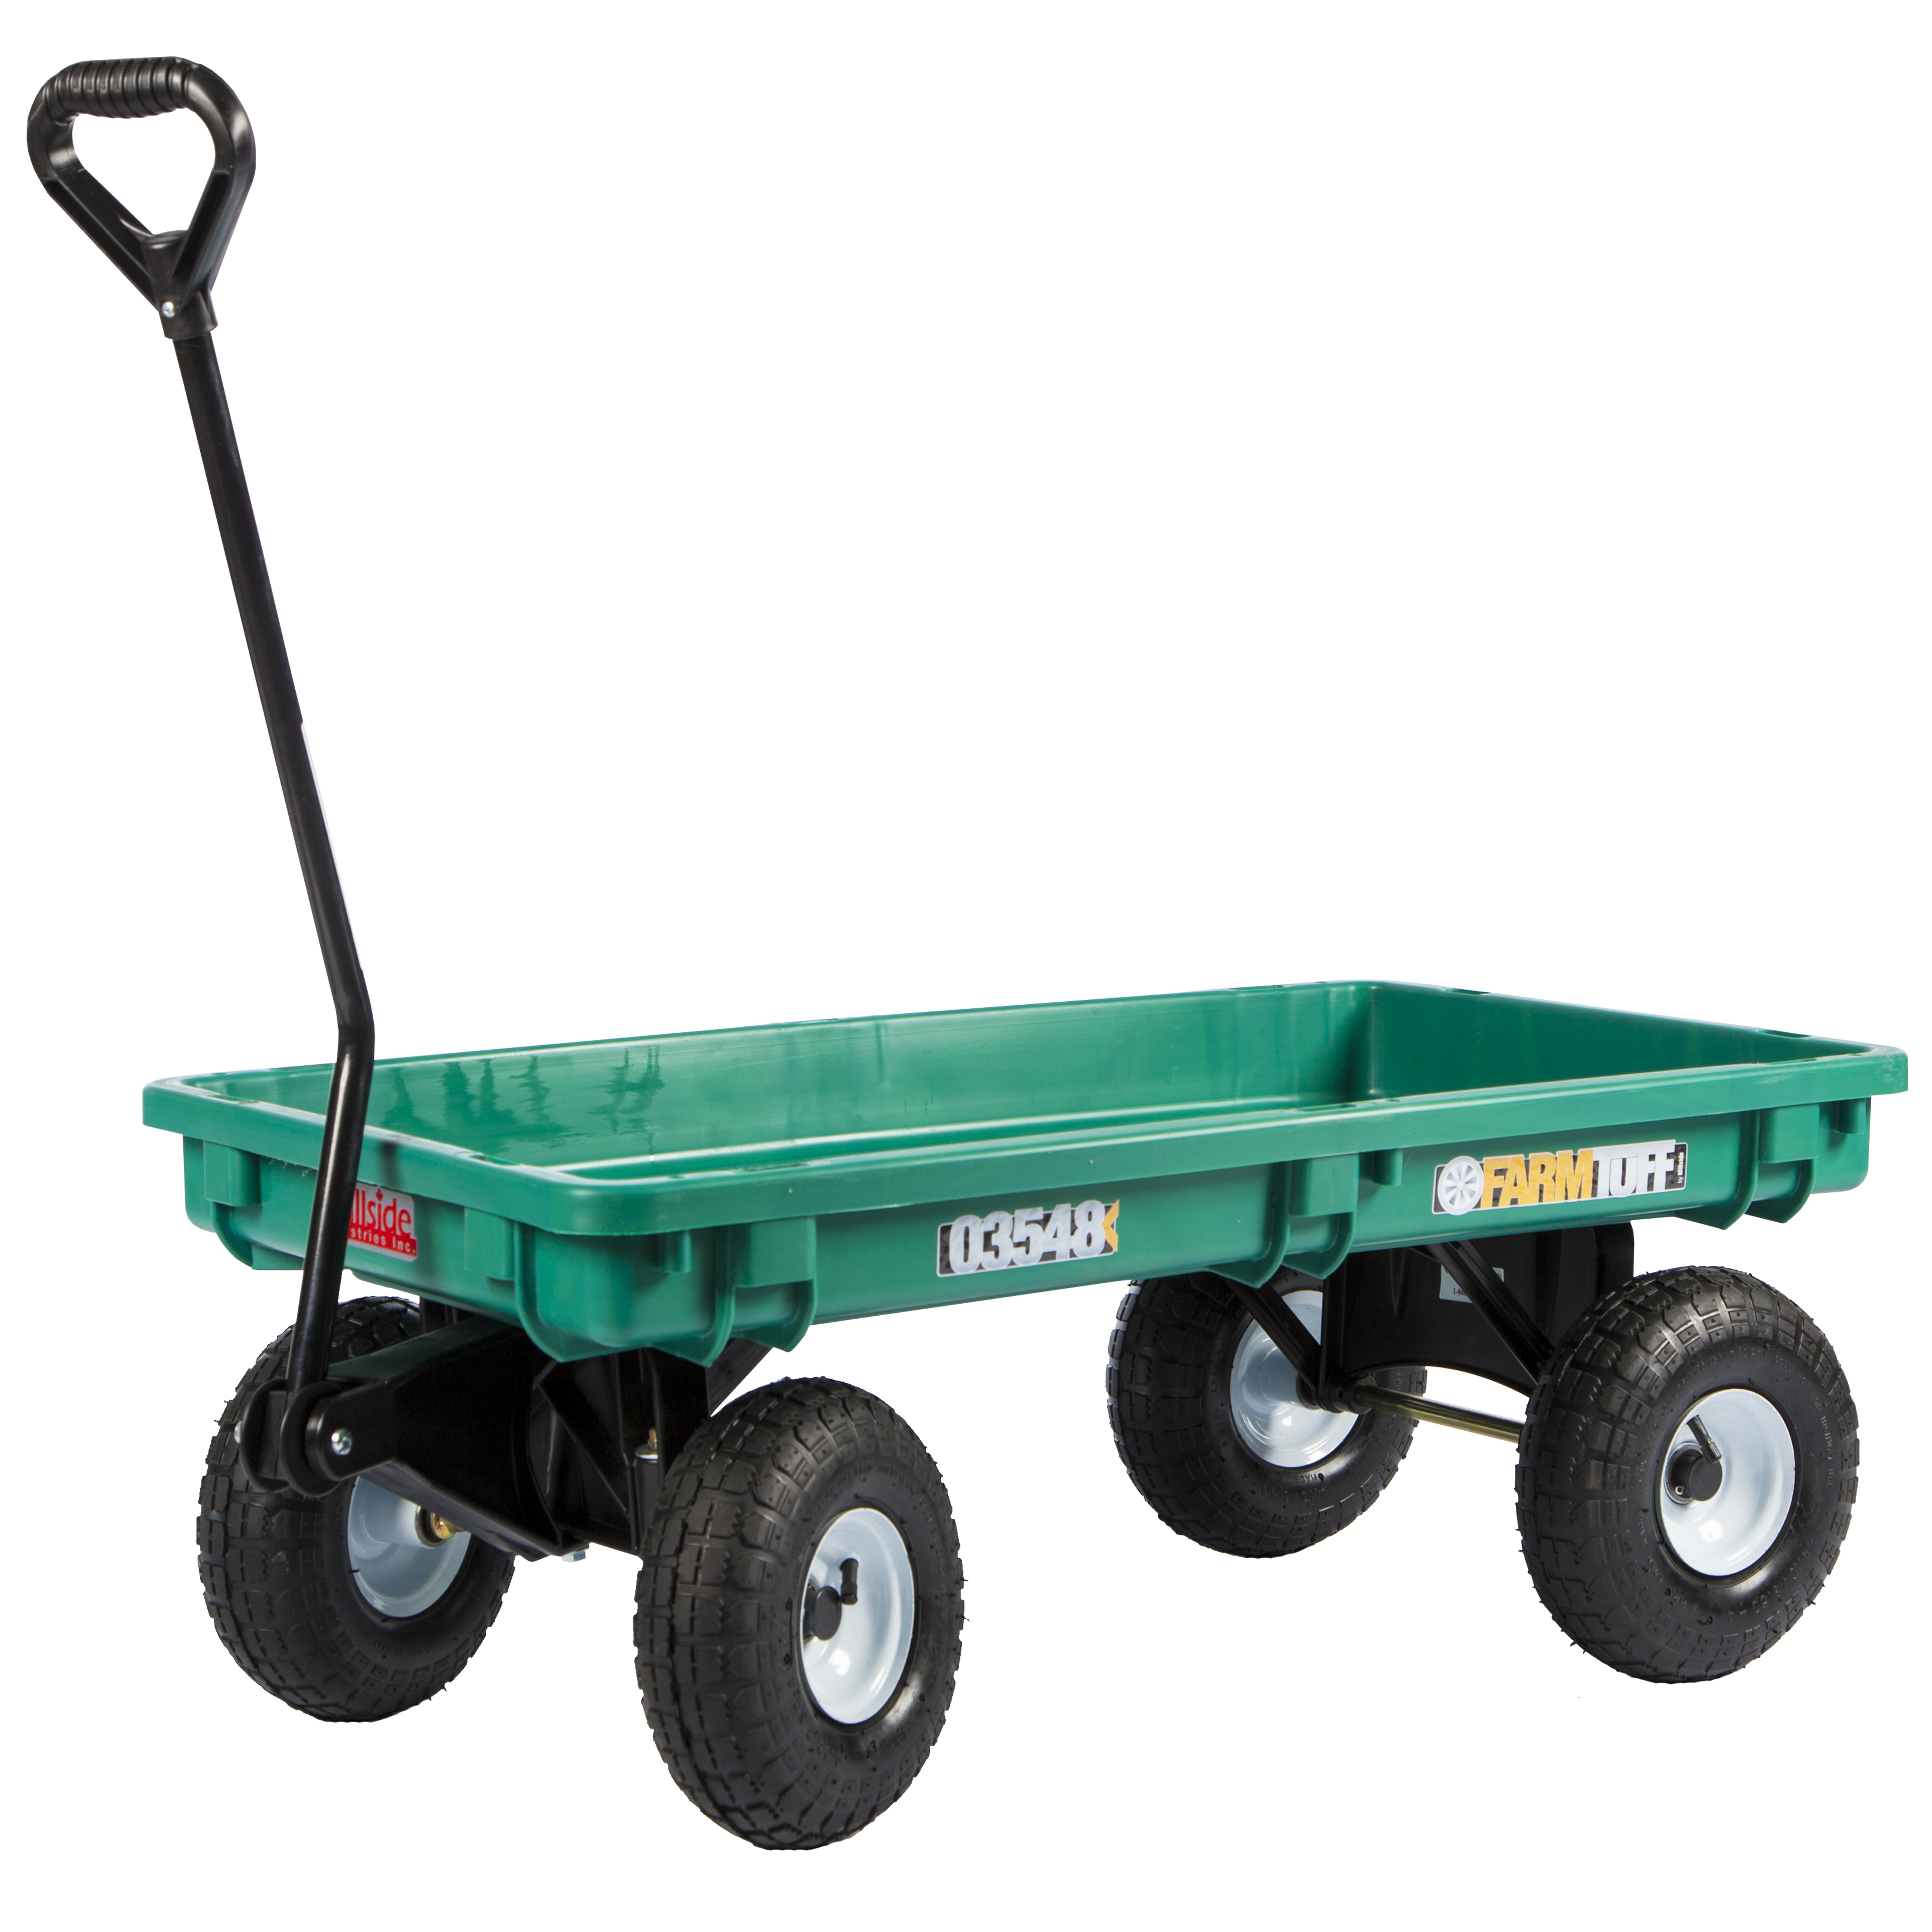 MSI03548FF Millside Poly-Deck Garden Wagon with Flat Free Tires, Green